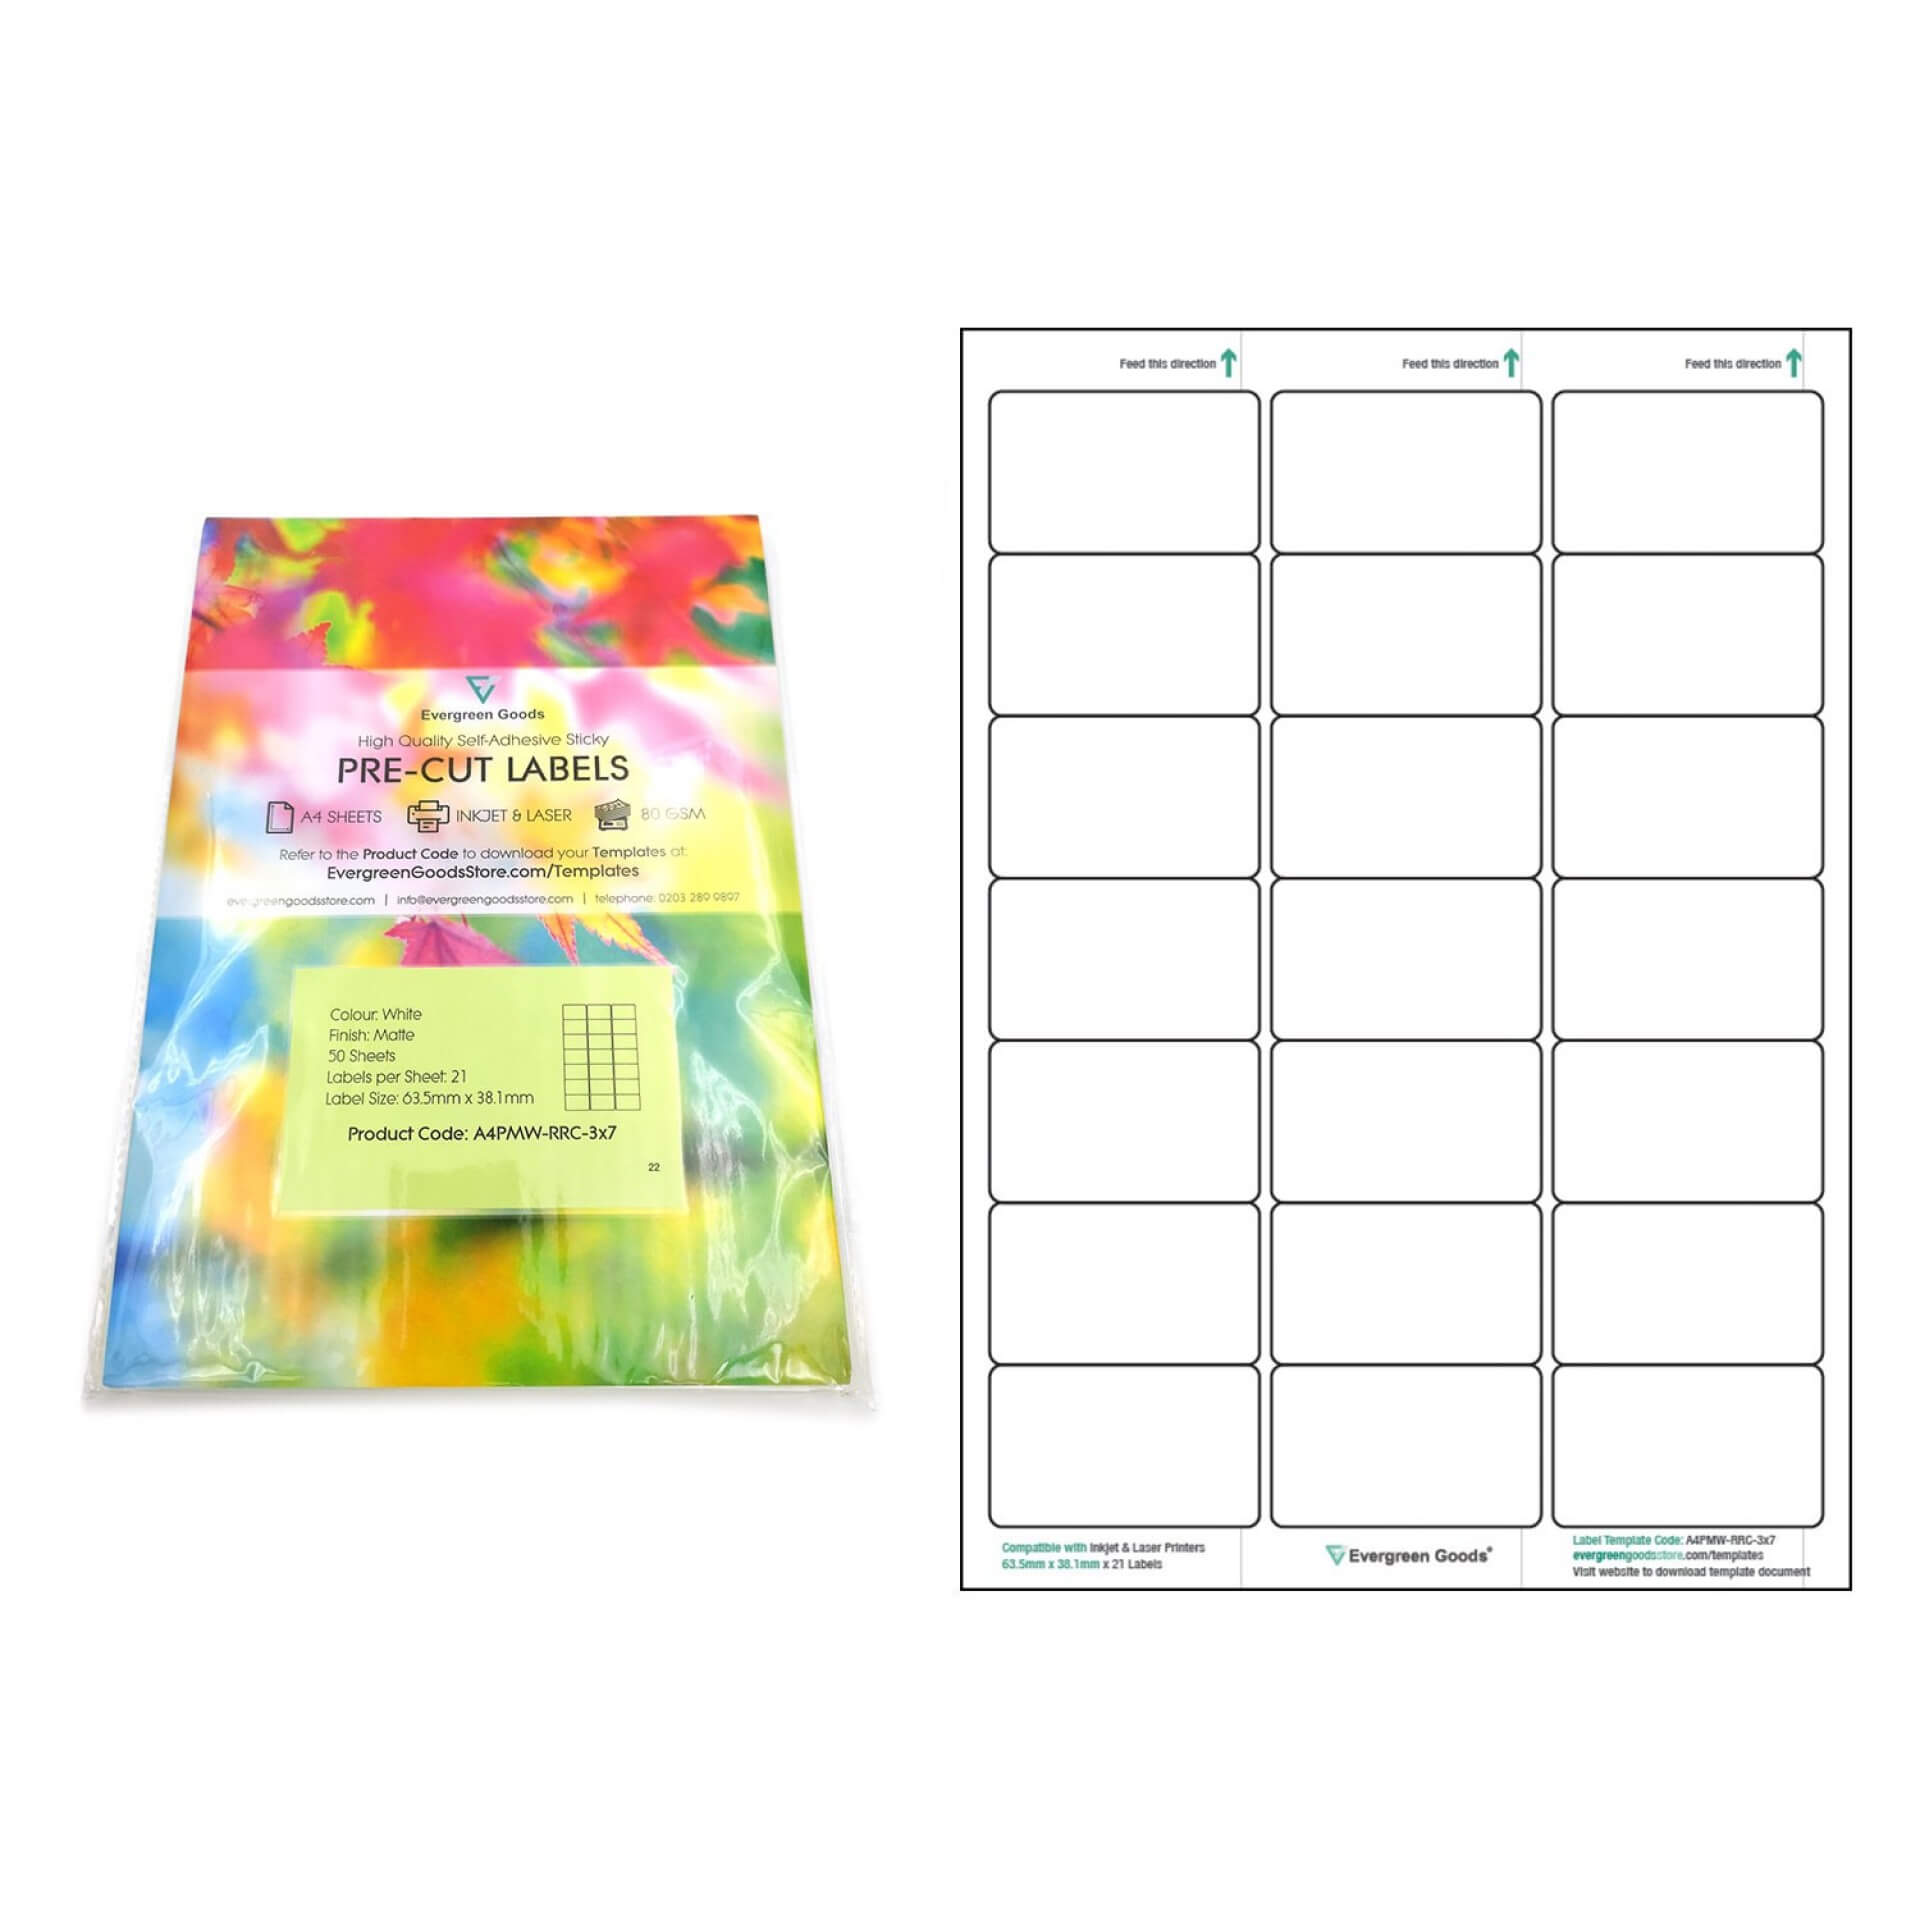 001 Word Label Template Per Sheet Ideas A4Pmw Rrc 3X7 Throughout Label Template 21 Per Sheet Word